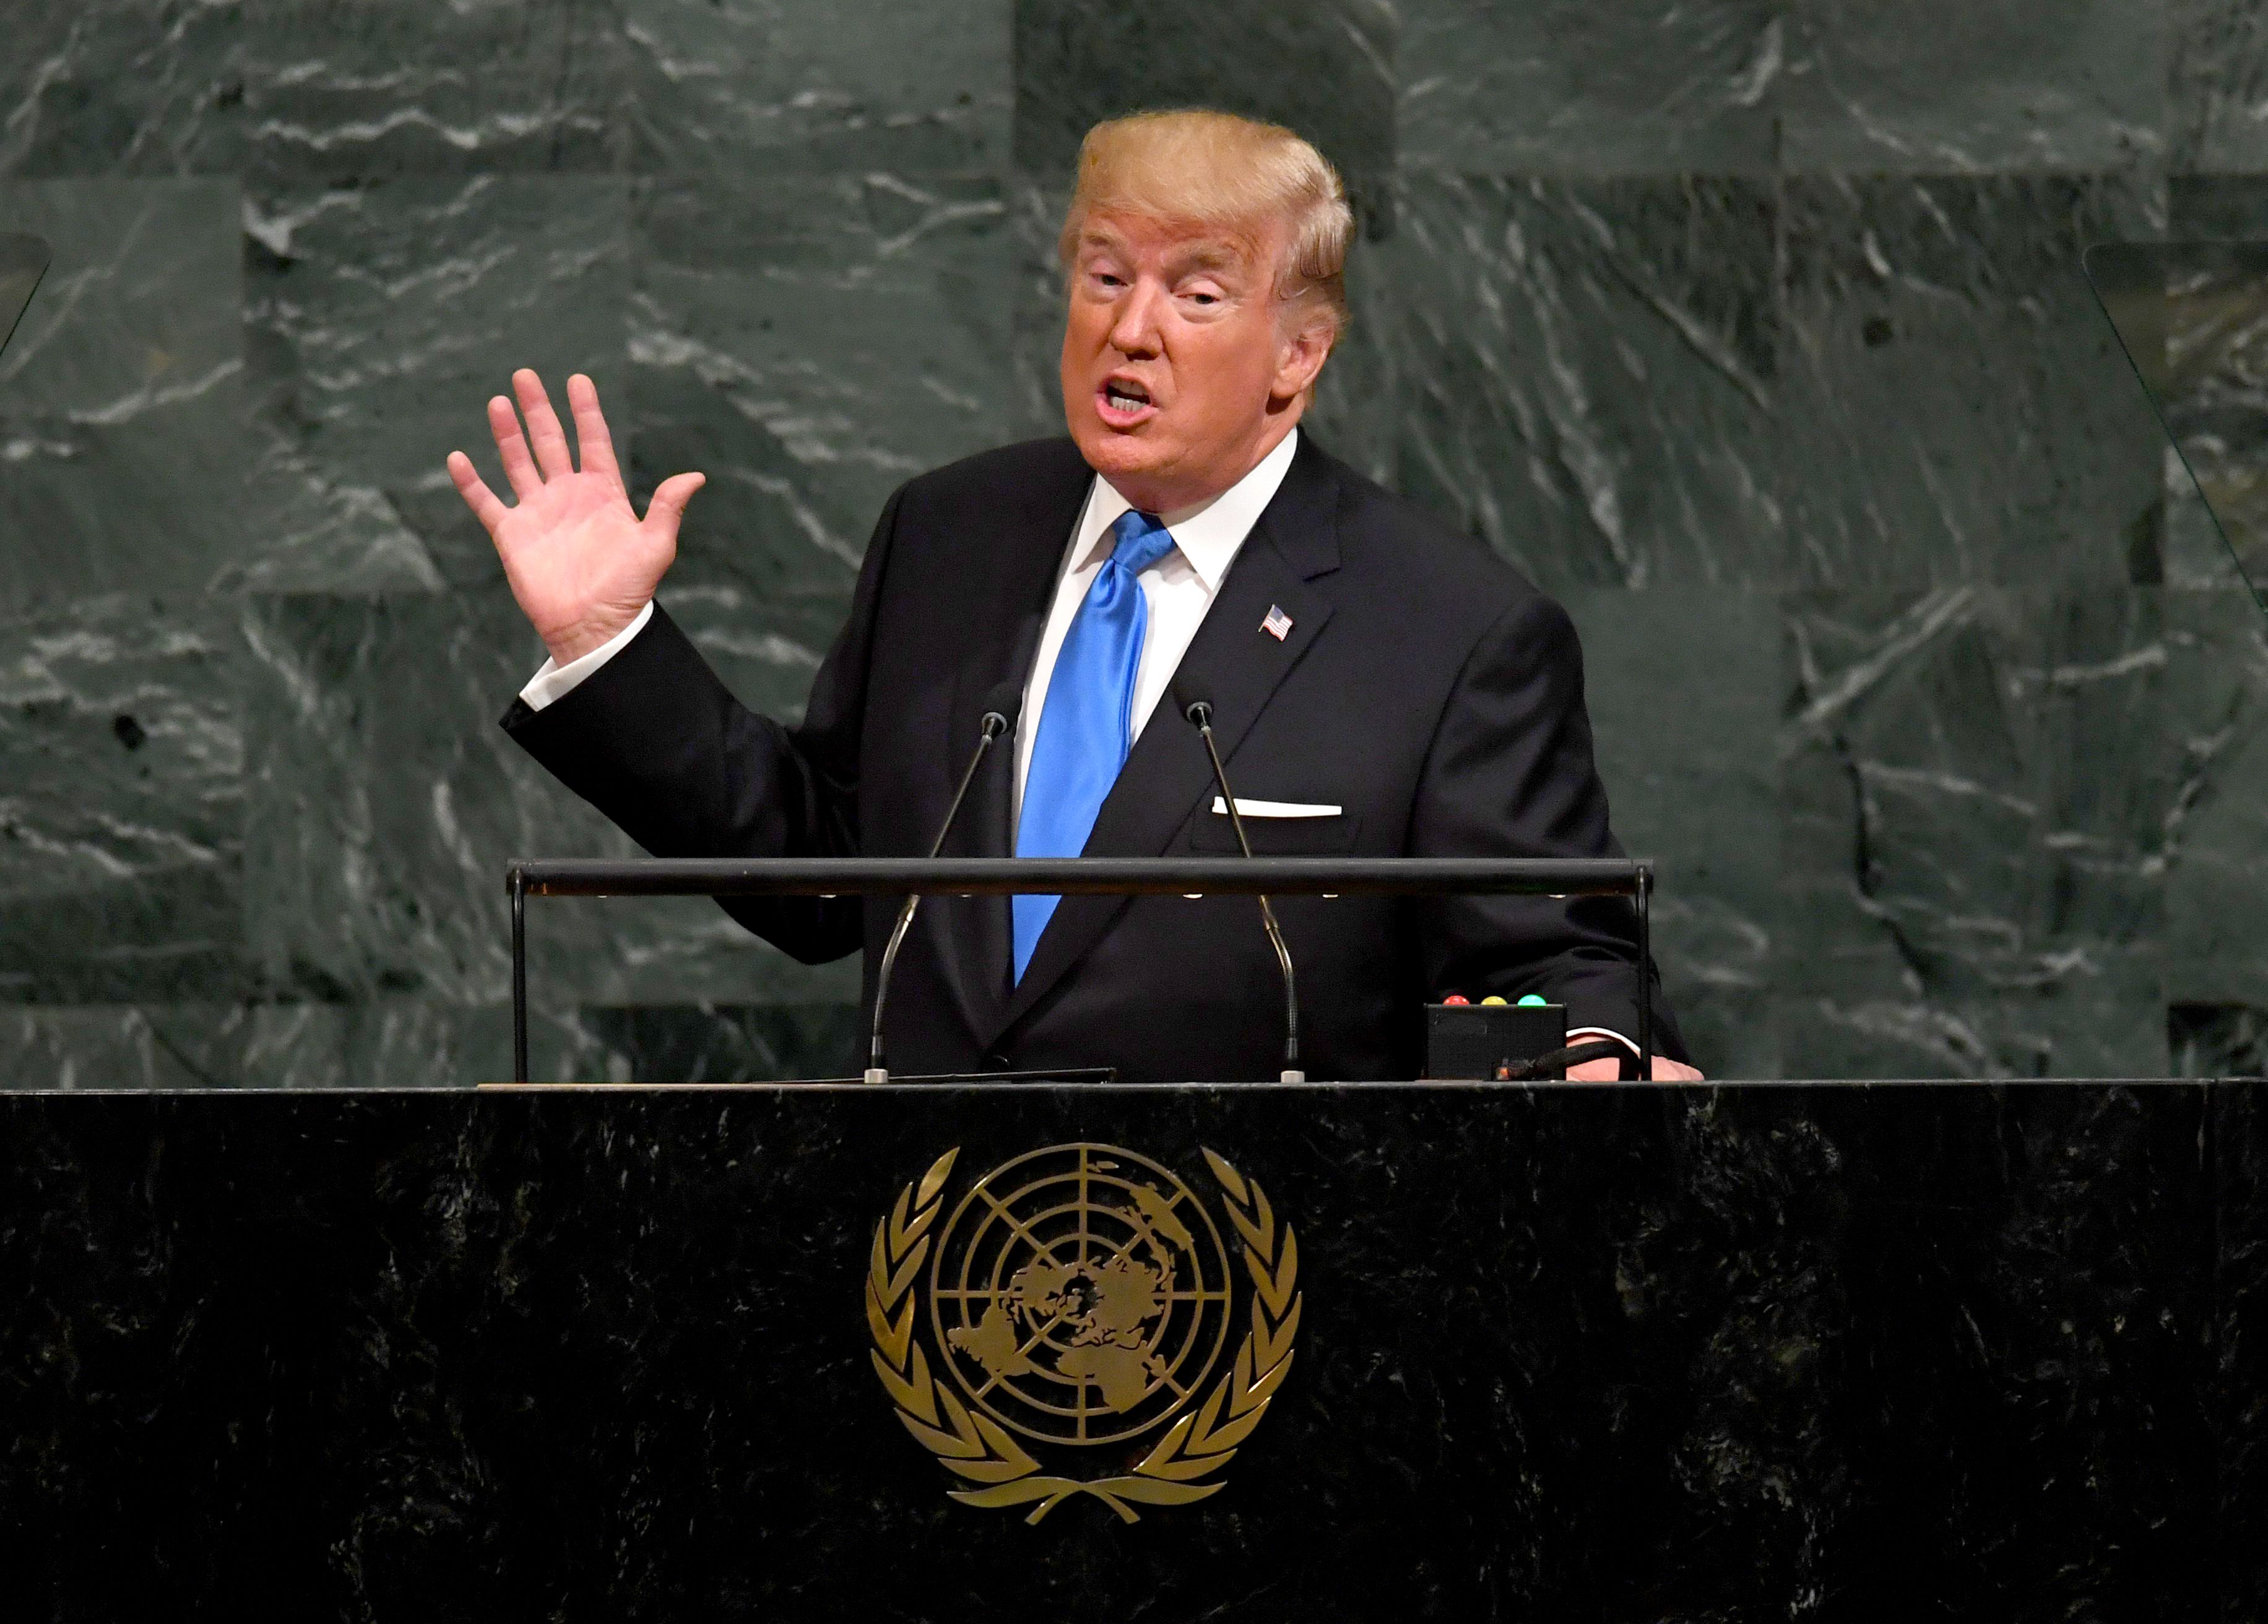 President Trump speaks at the United Nations.